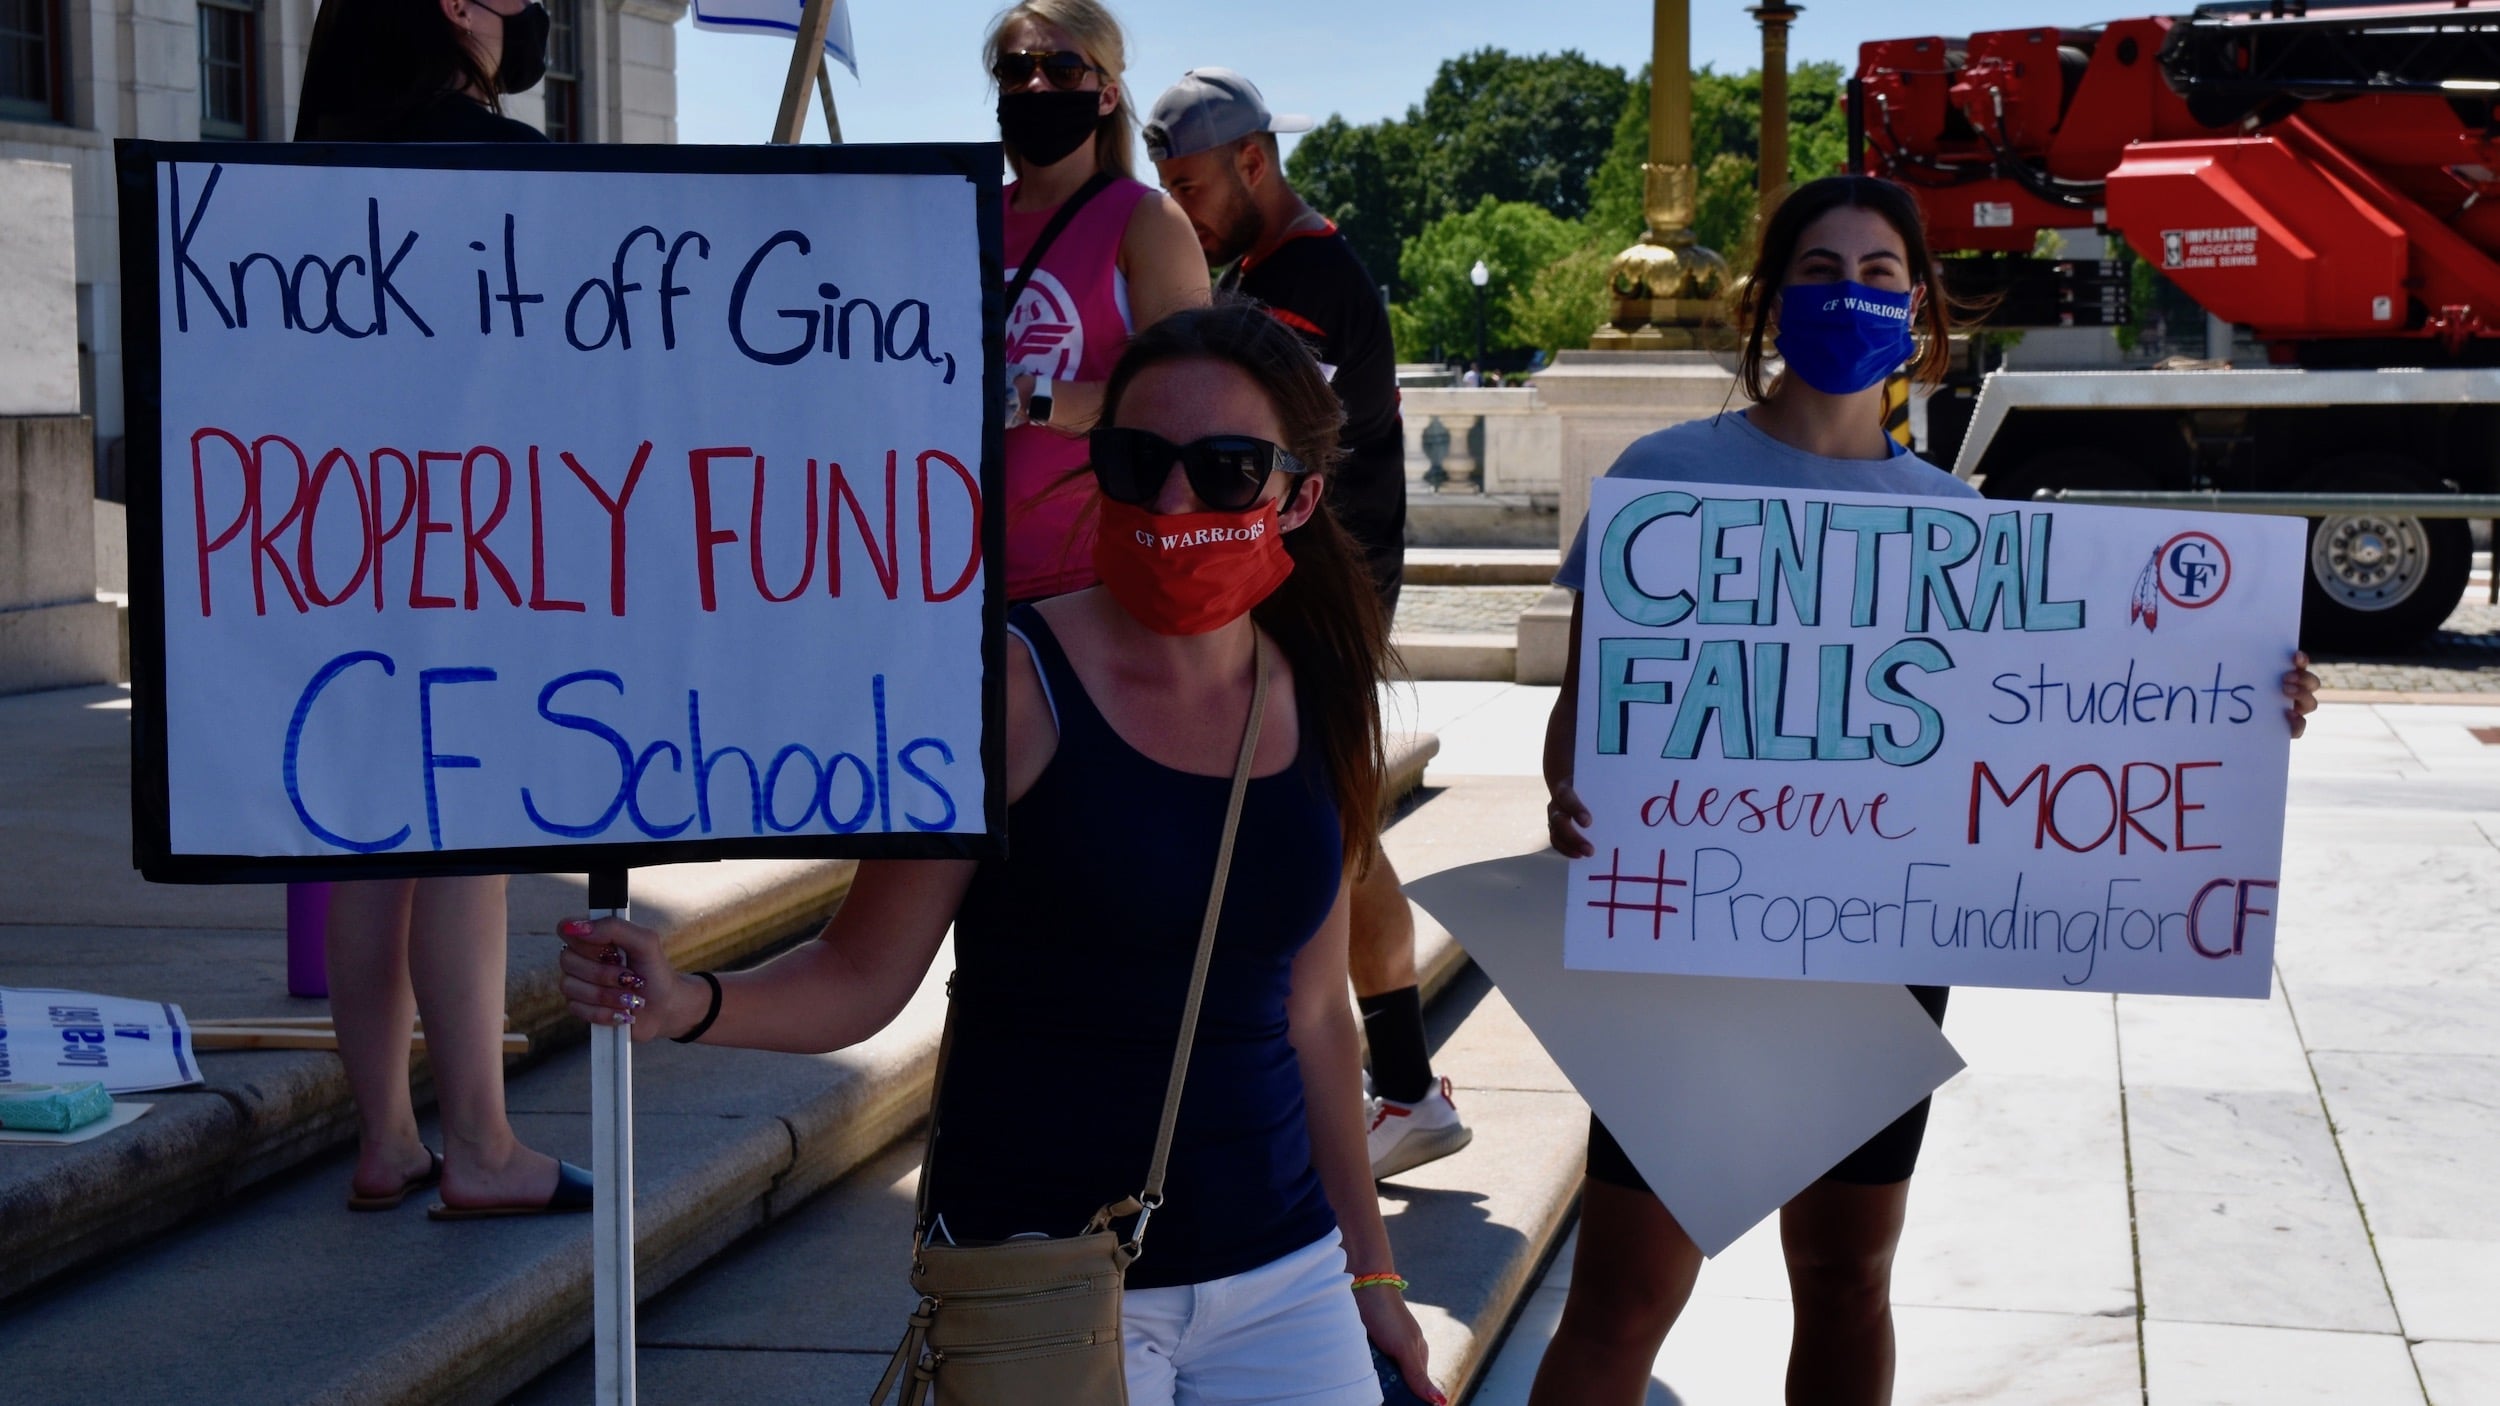 Rhode Island: Education is Freedom! The Central Falls Rally to fund the schools